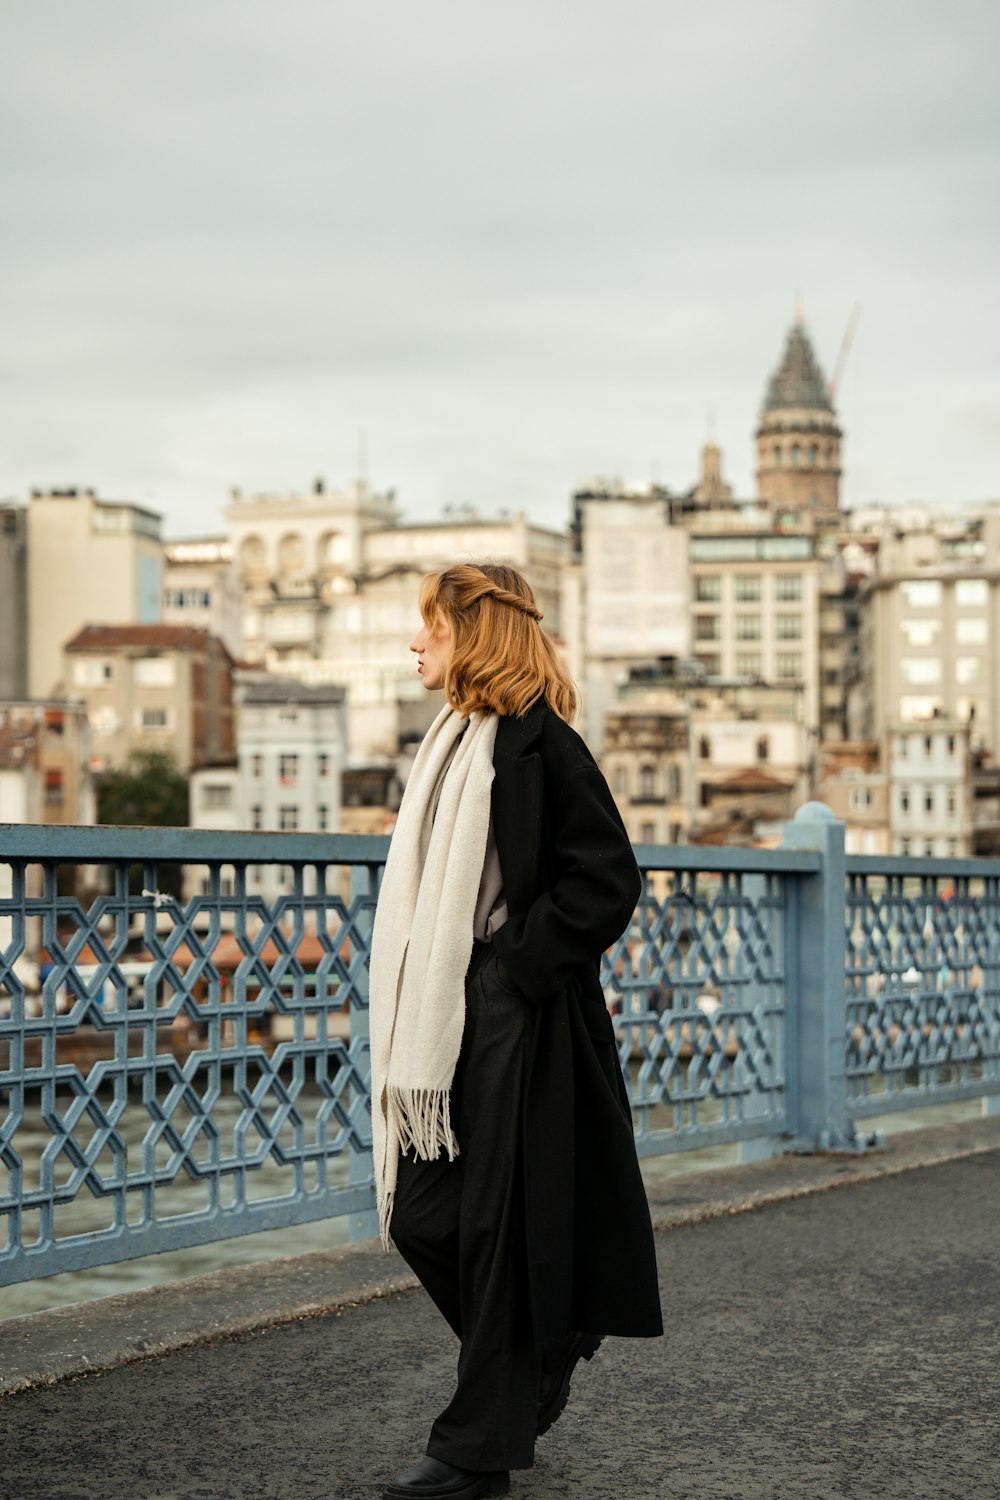 a woman walking across a bridge with a city in the background